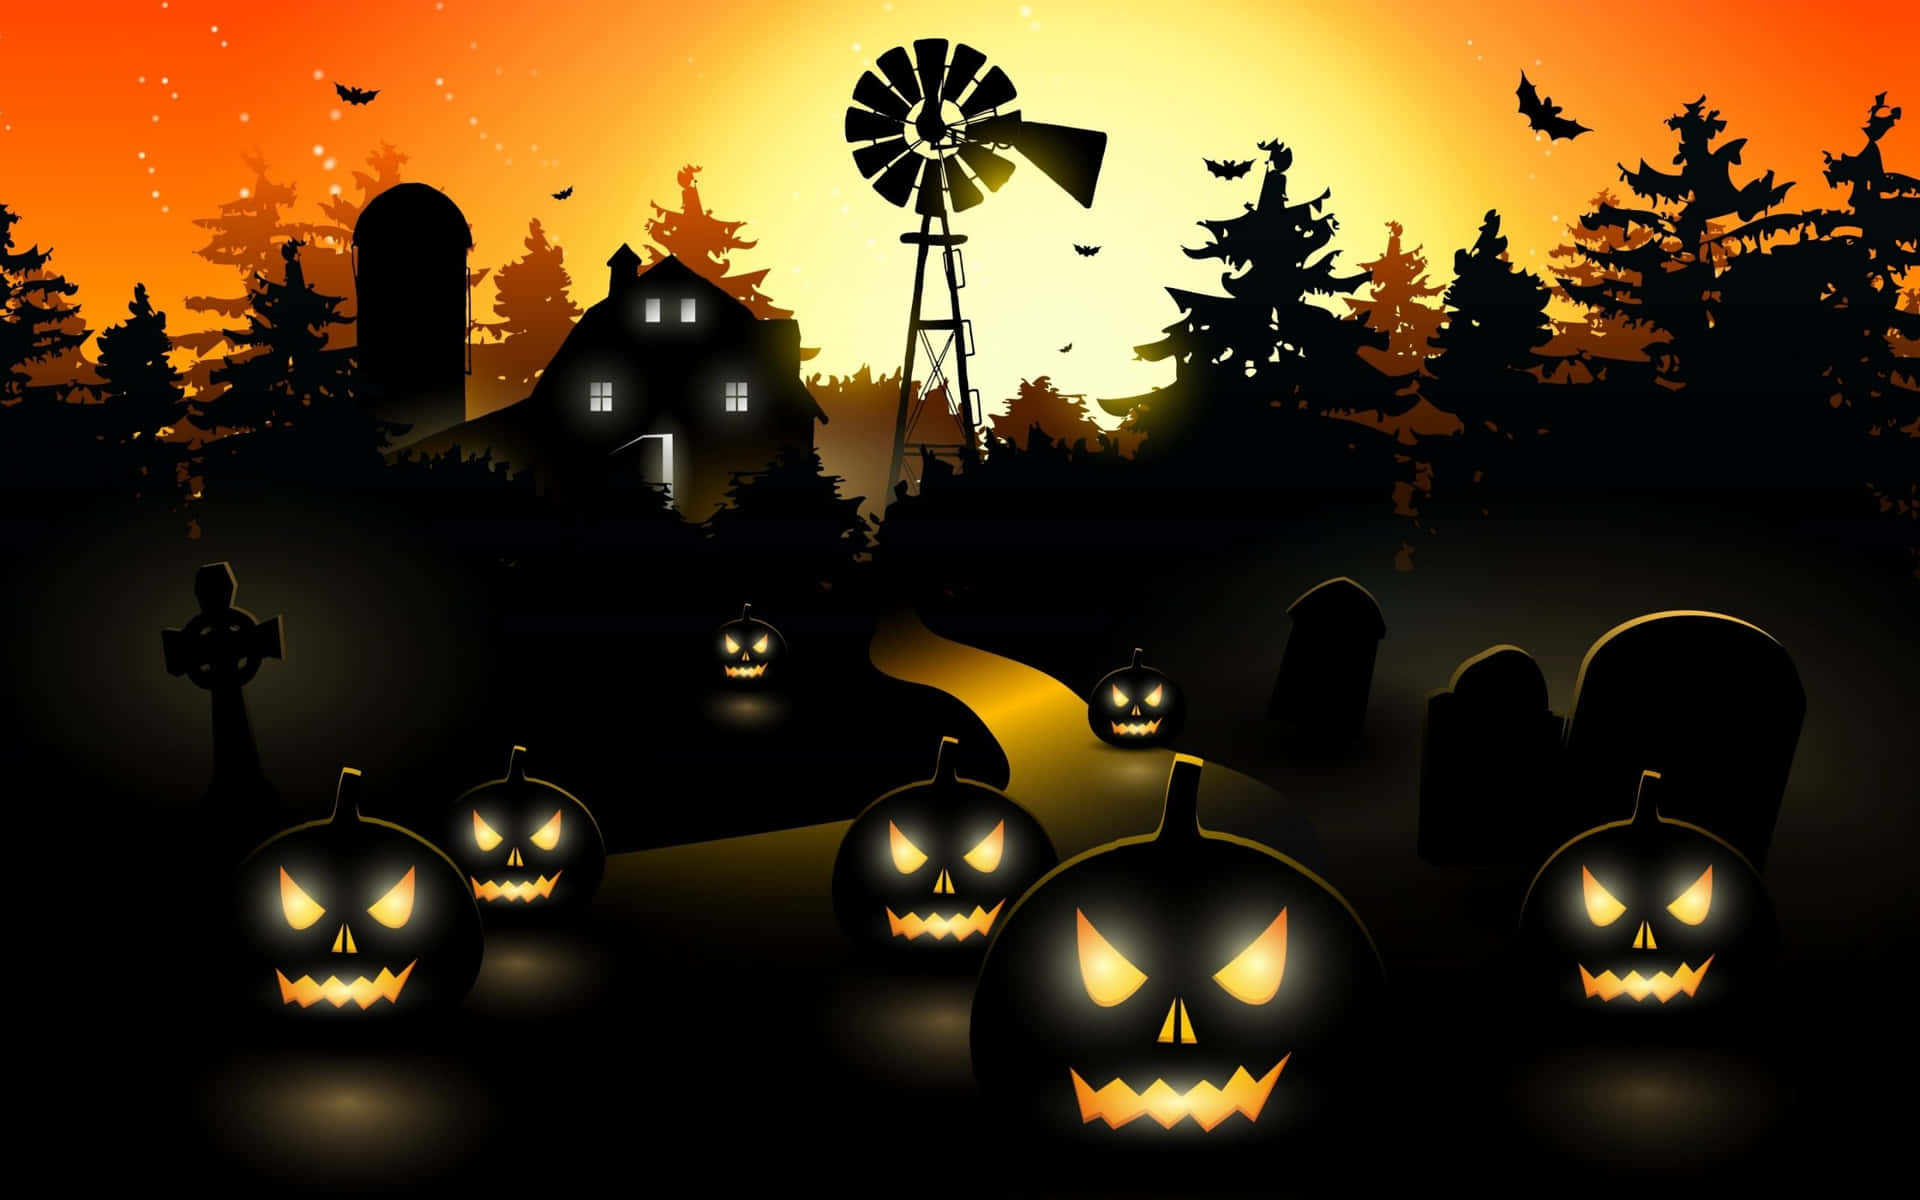 ____ Feeling spooked? Get into the Halloween spirit with this spooky background.